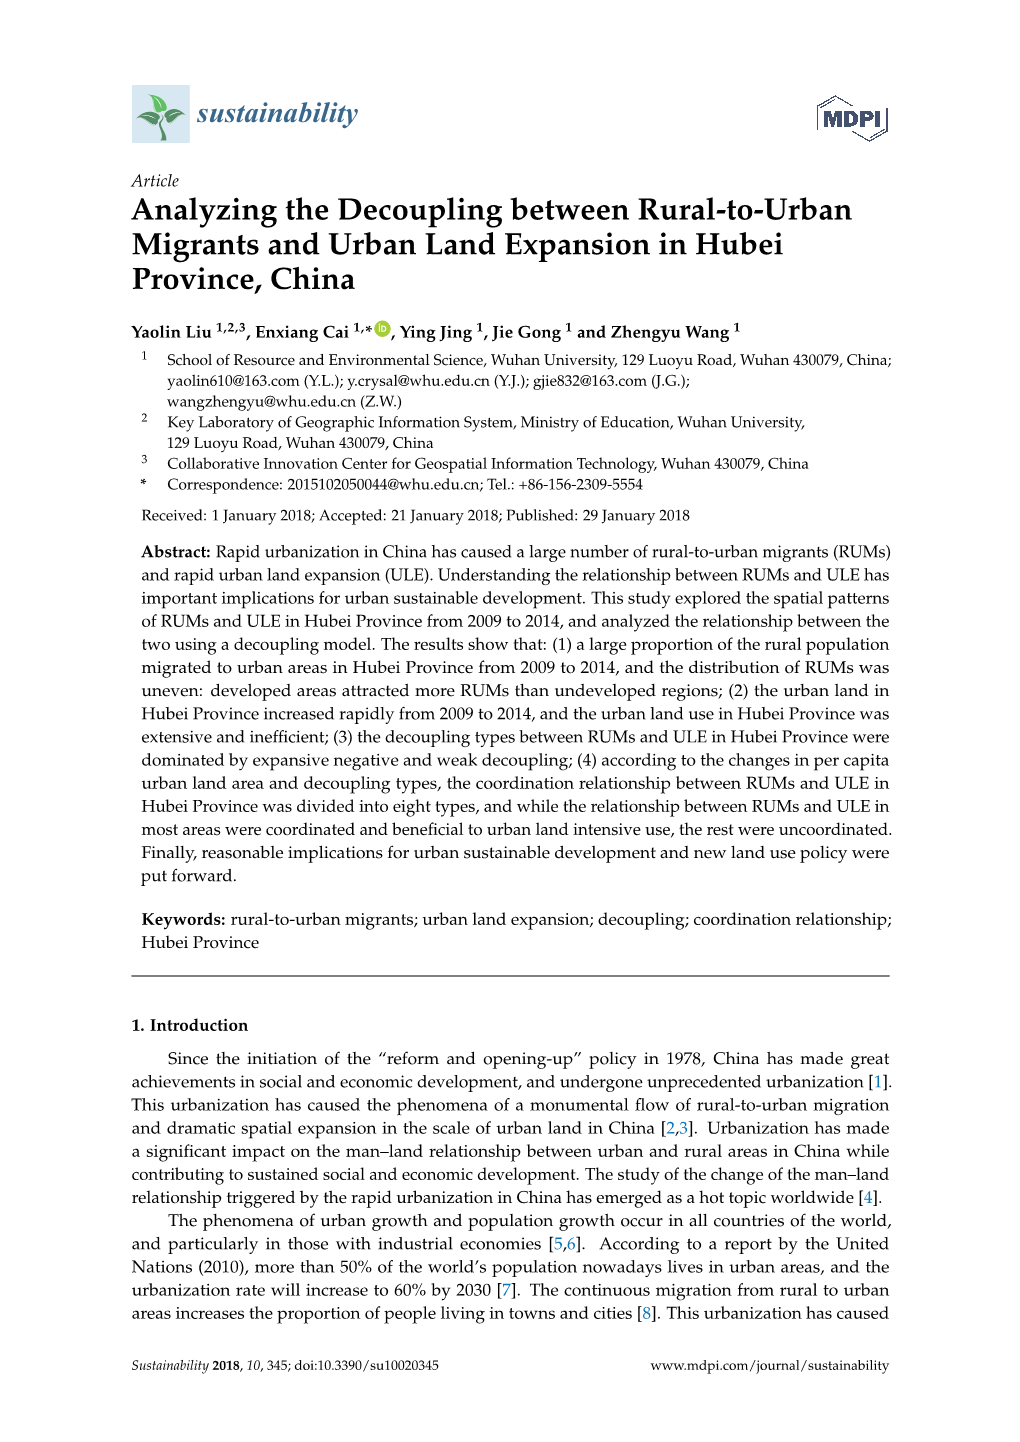 Analyzing the Decoupling Between Rural-To-Urban Migrants and Urban Land Expansion in Hubei Province, China